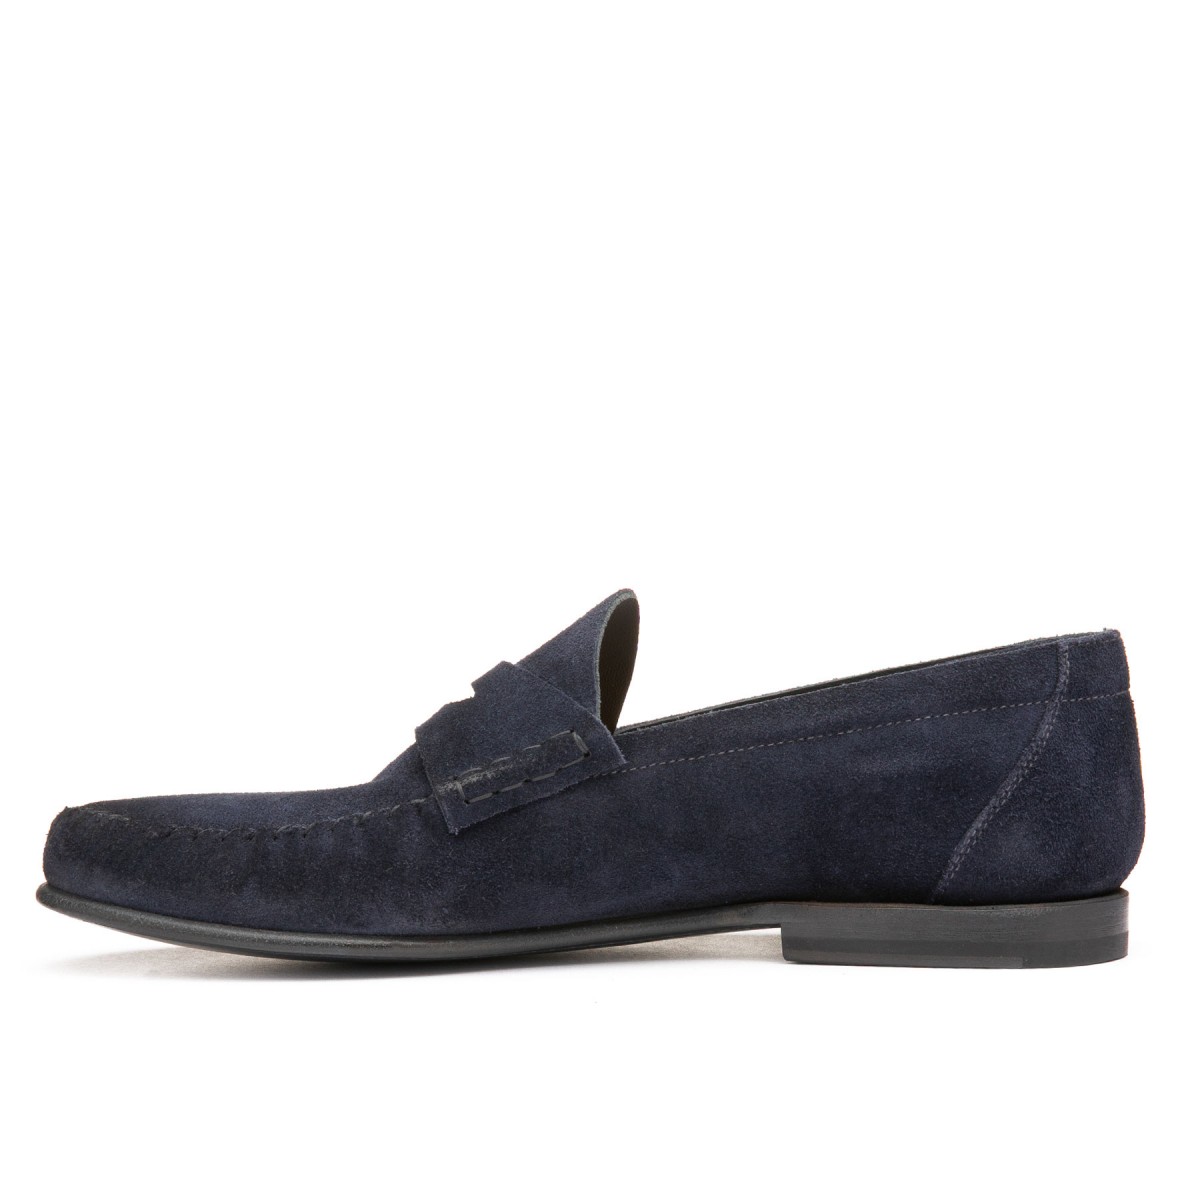 Navy suede Penny loafers